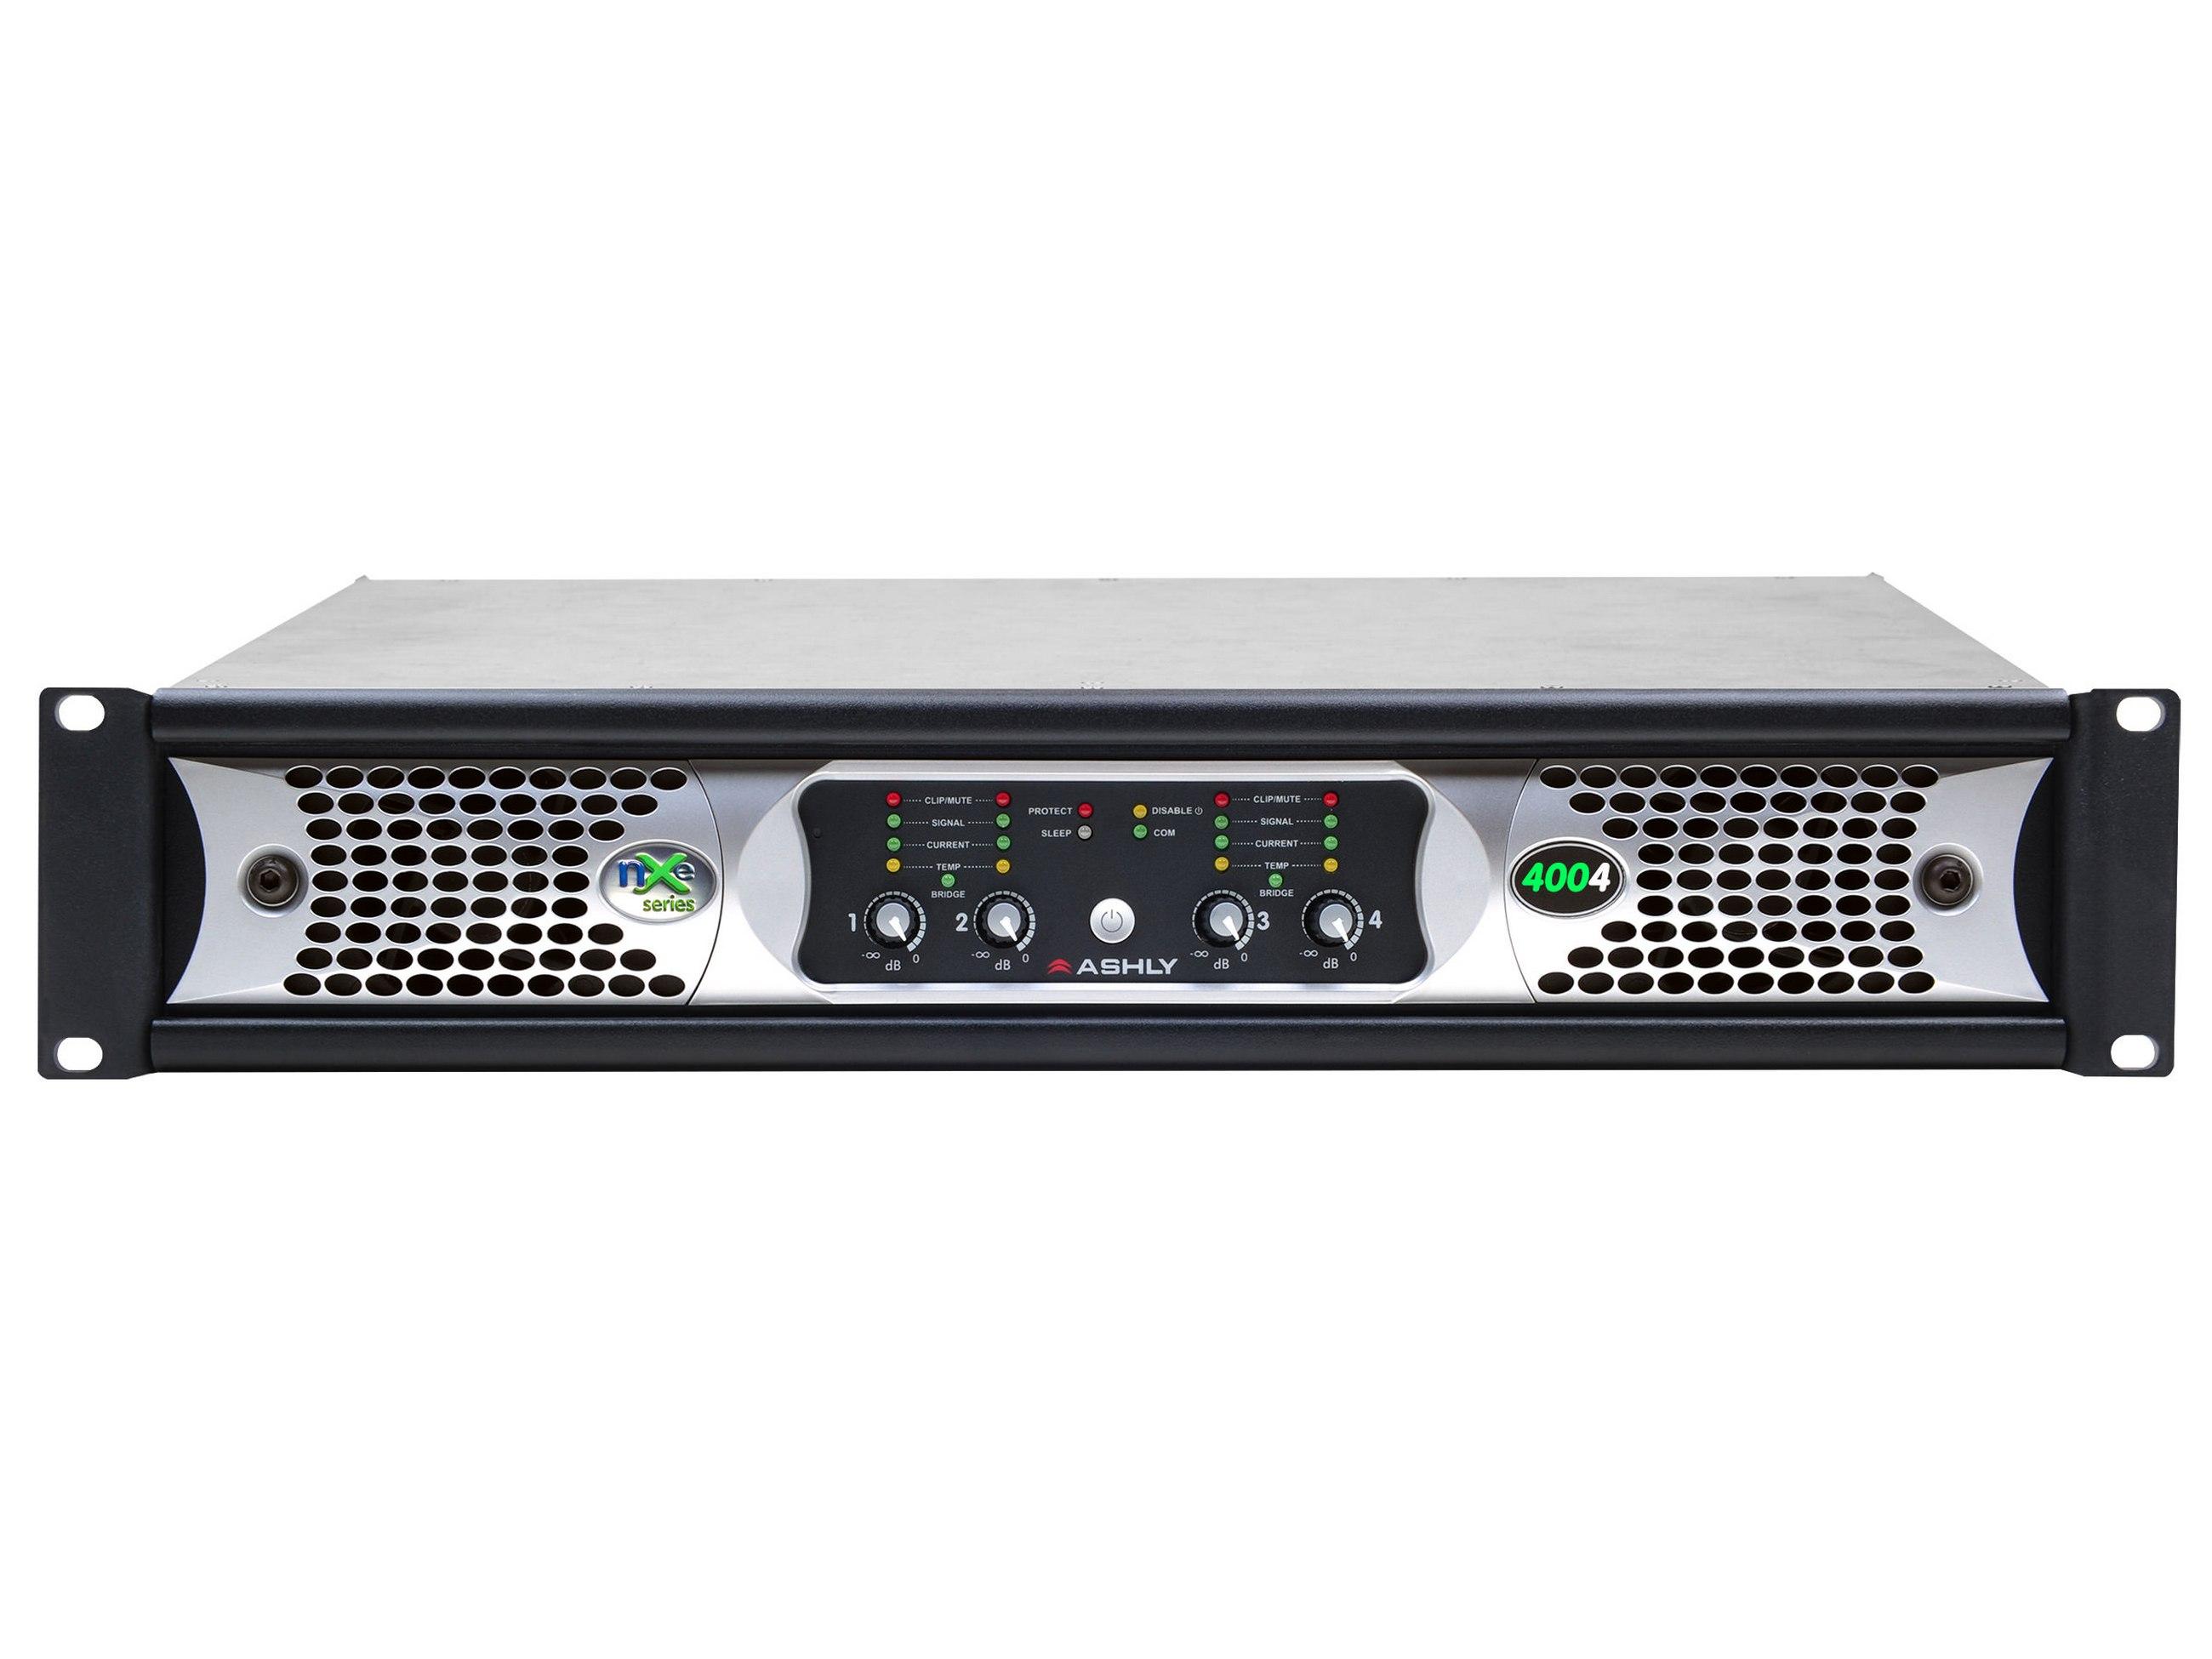 nXe4004bd 4x 400 Watts/2 Ohms Network Power Amplifier with OPDante and OPDAC4 Option Cards by Ashly